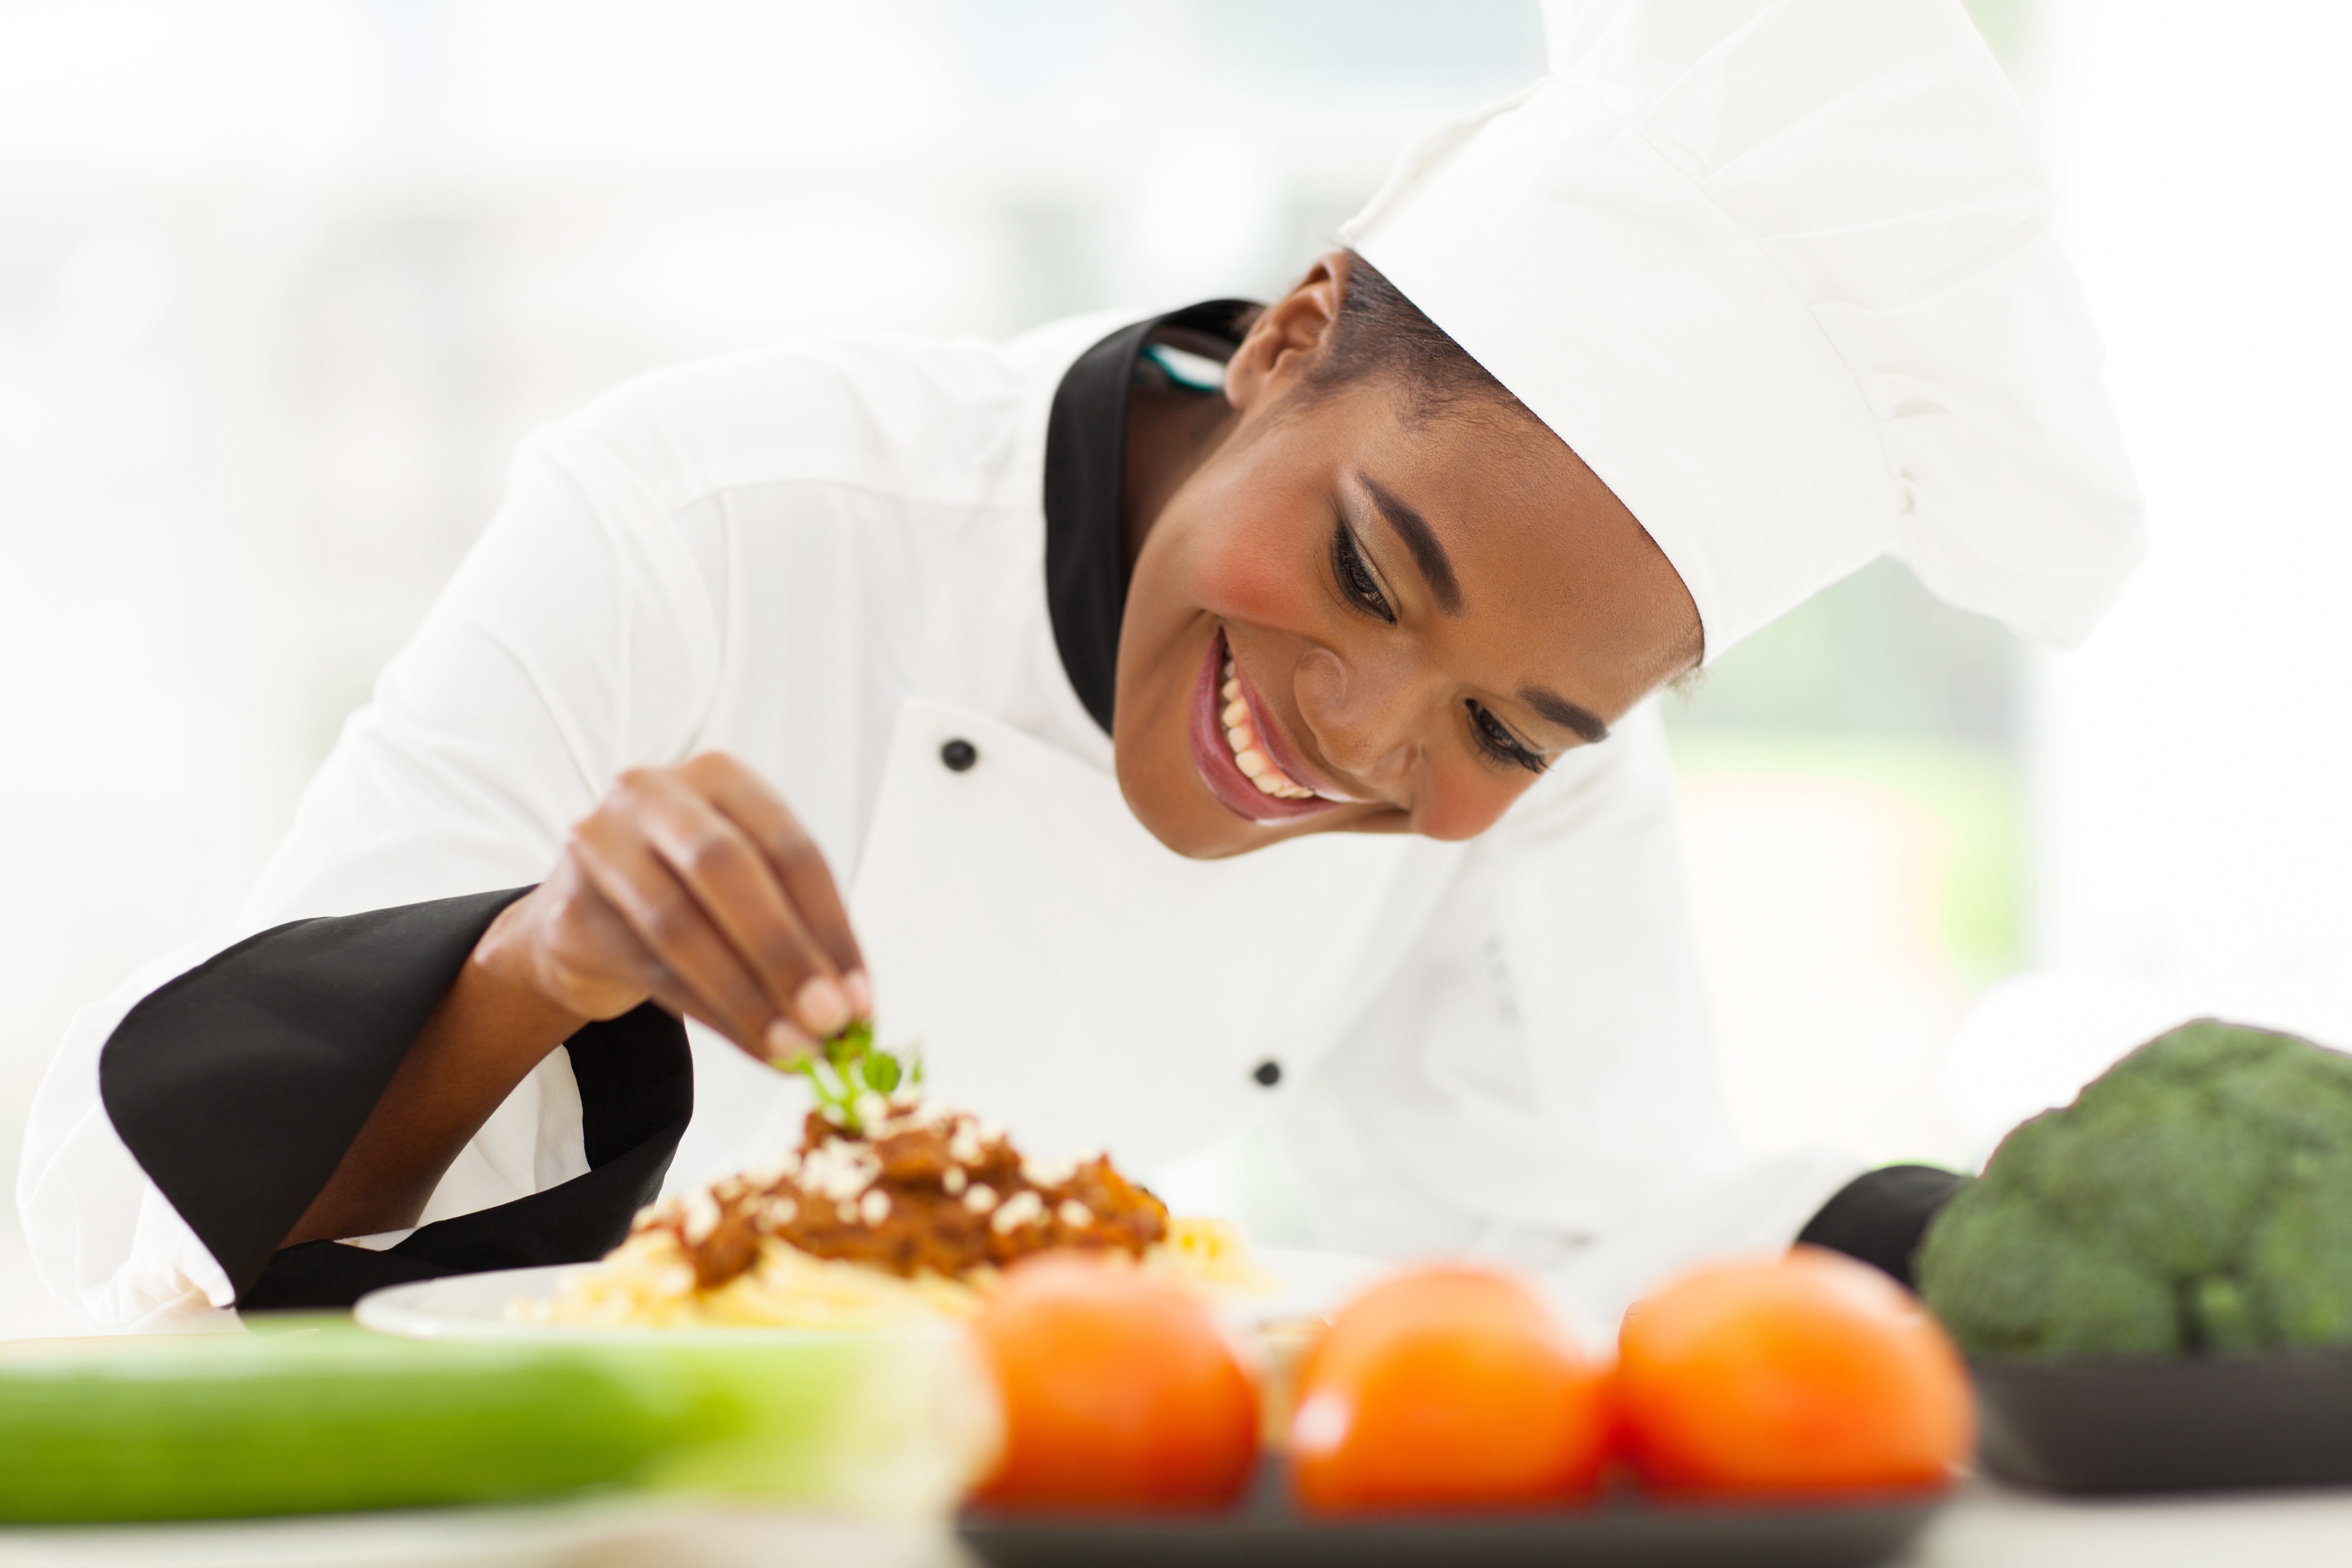 The 10 Best Jobs For Foodies